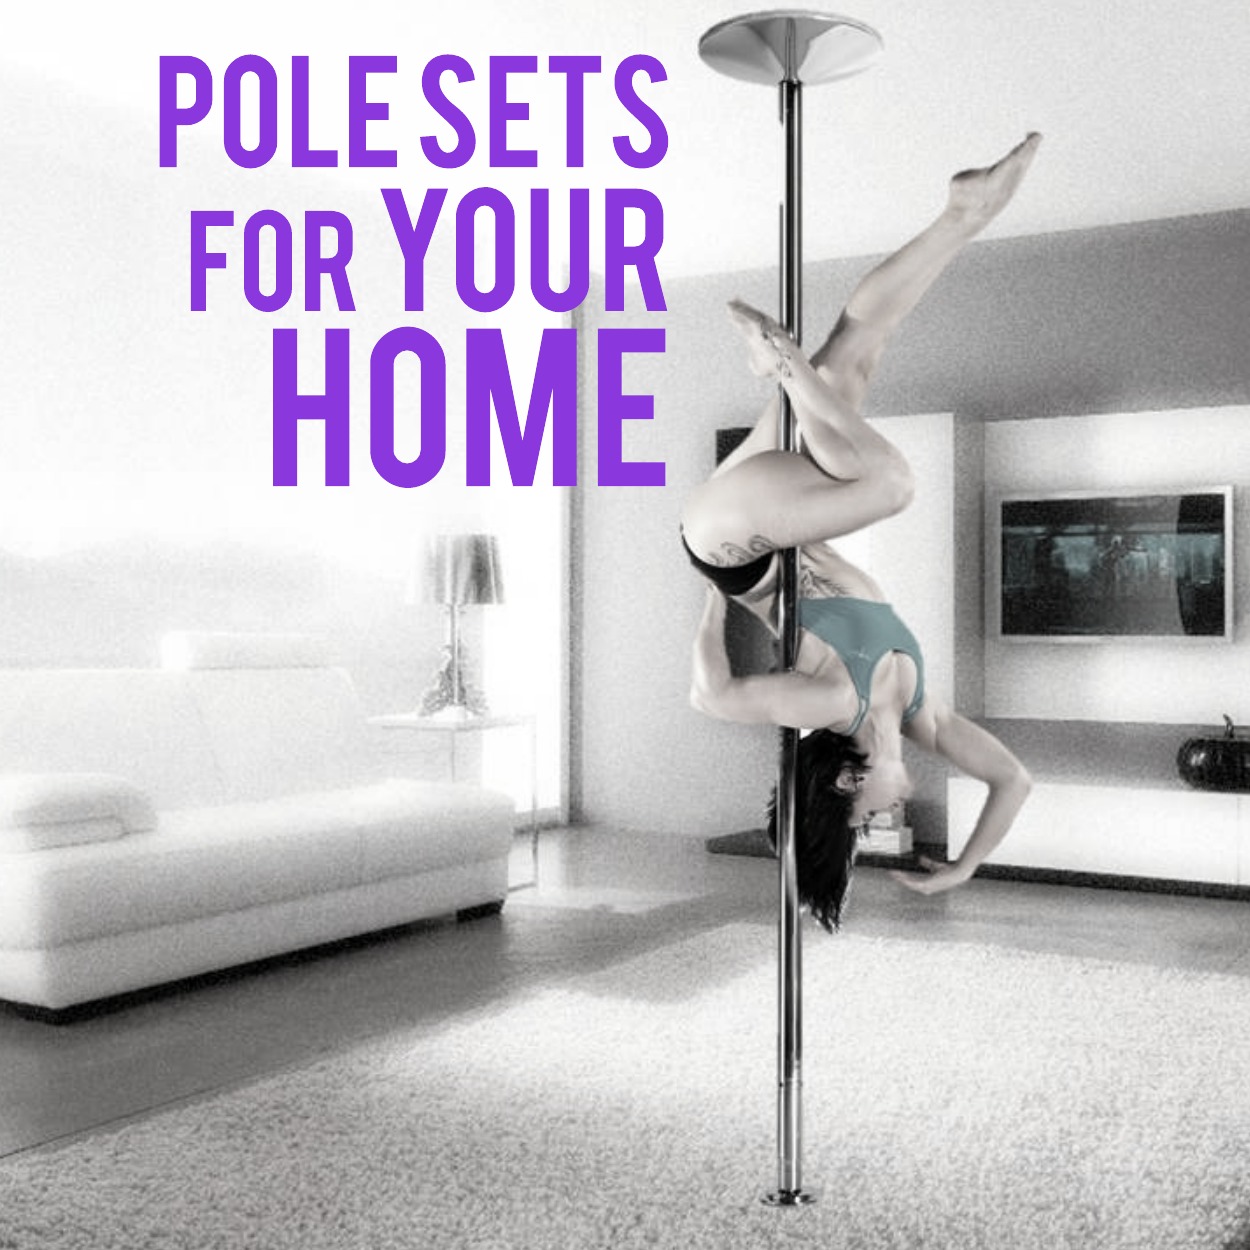 Best Stripper Poles To Buy For A SAFE Pole Dancing Workout At Home